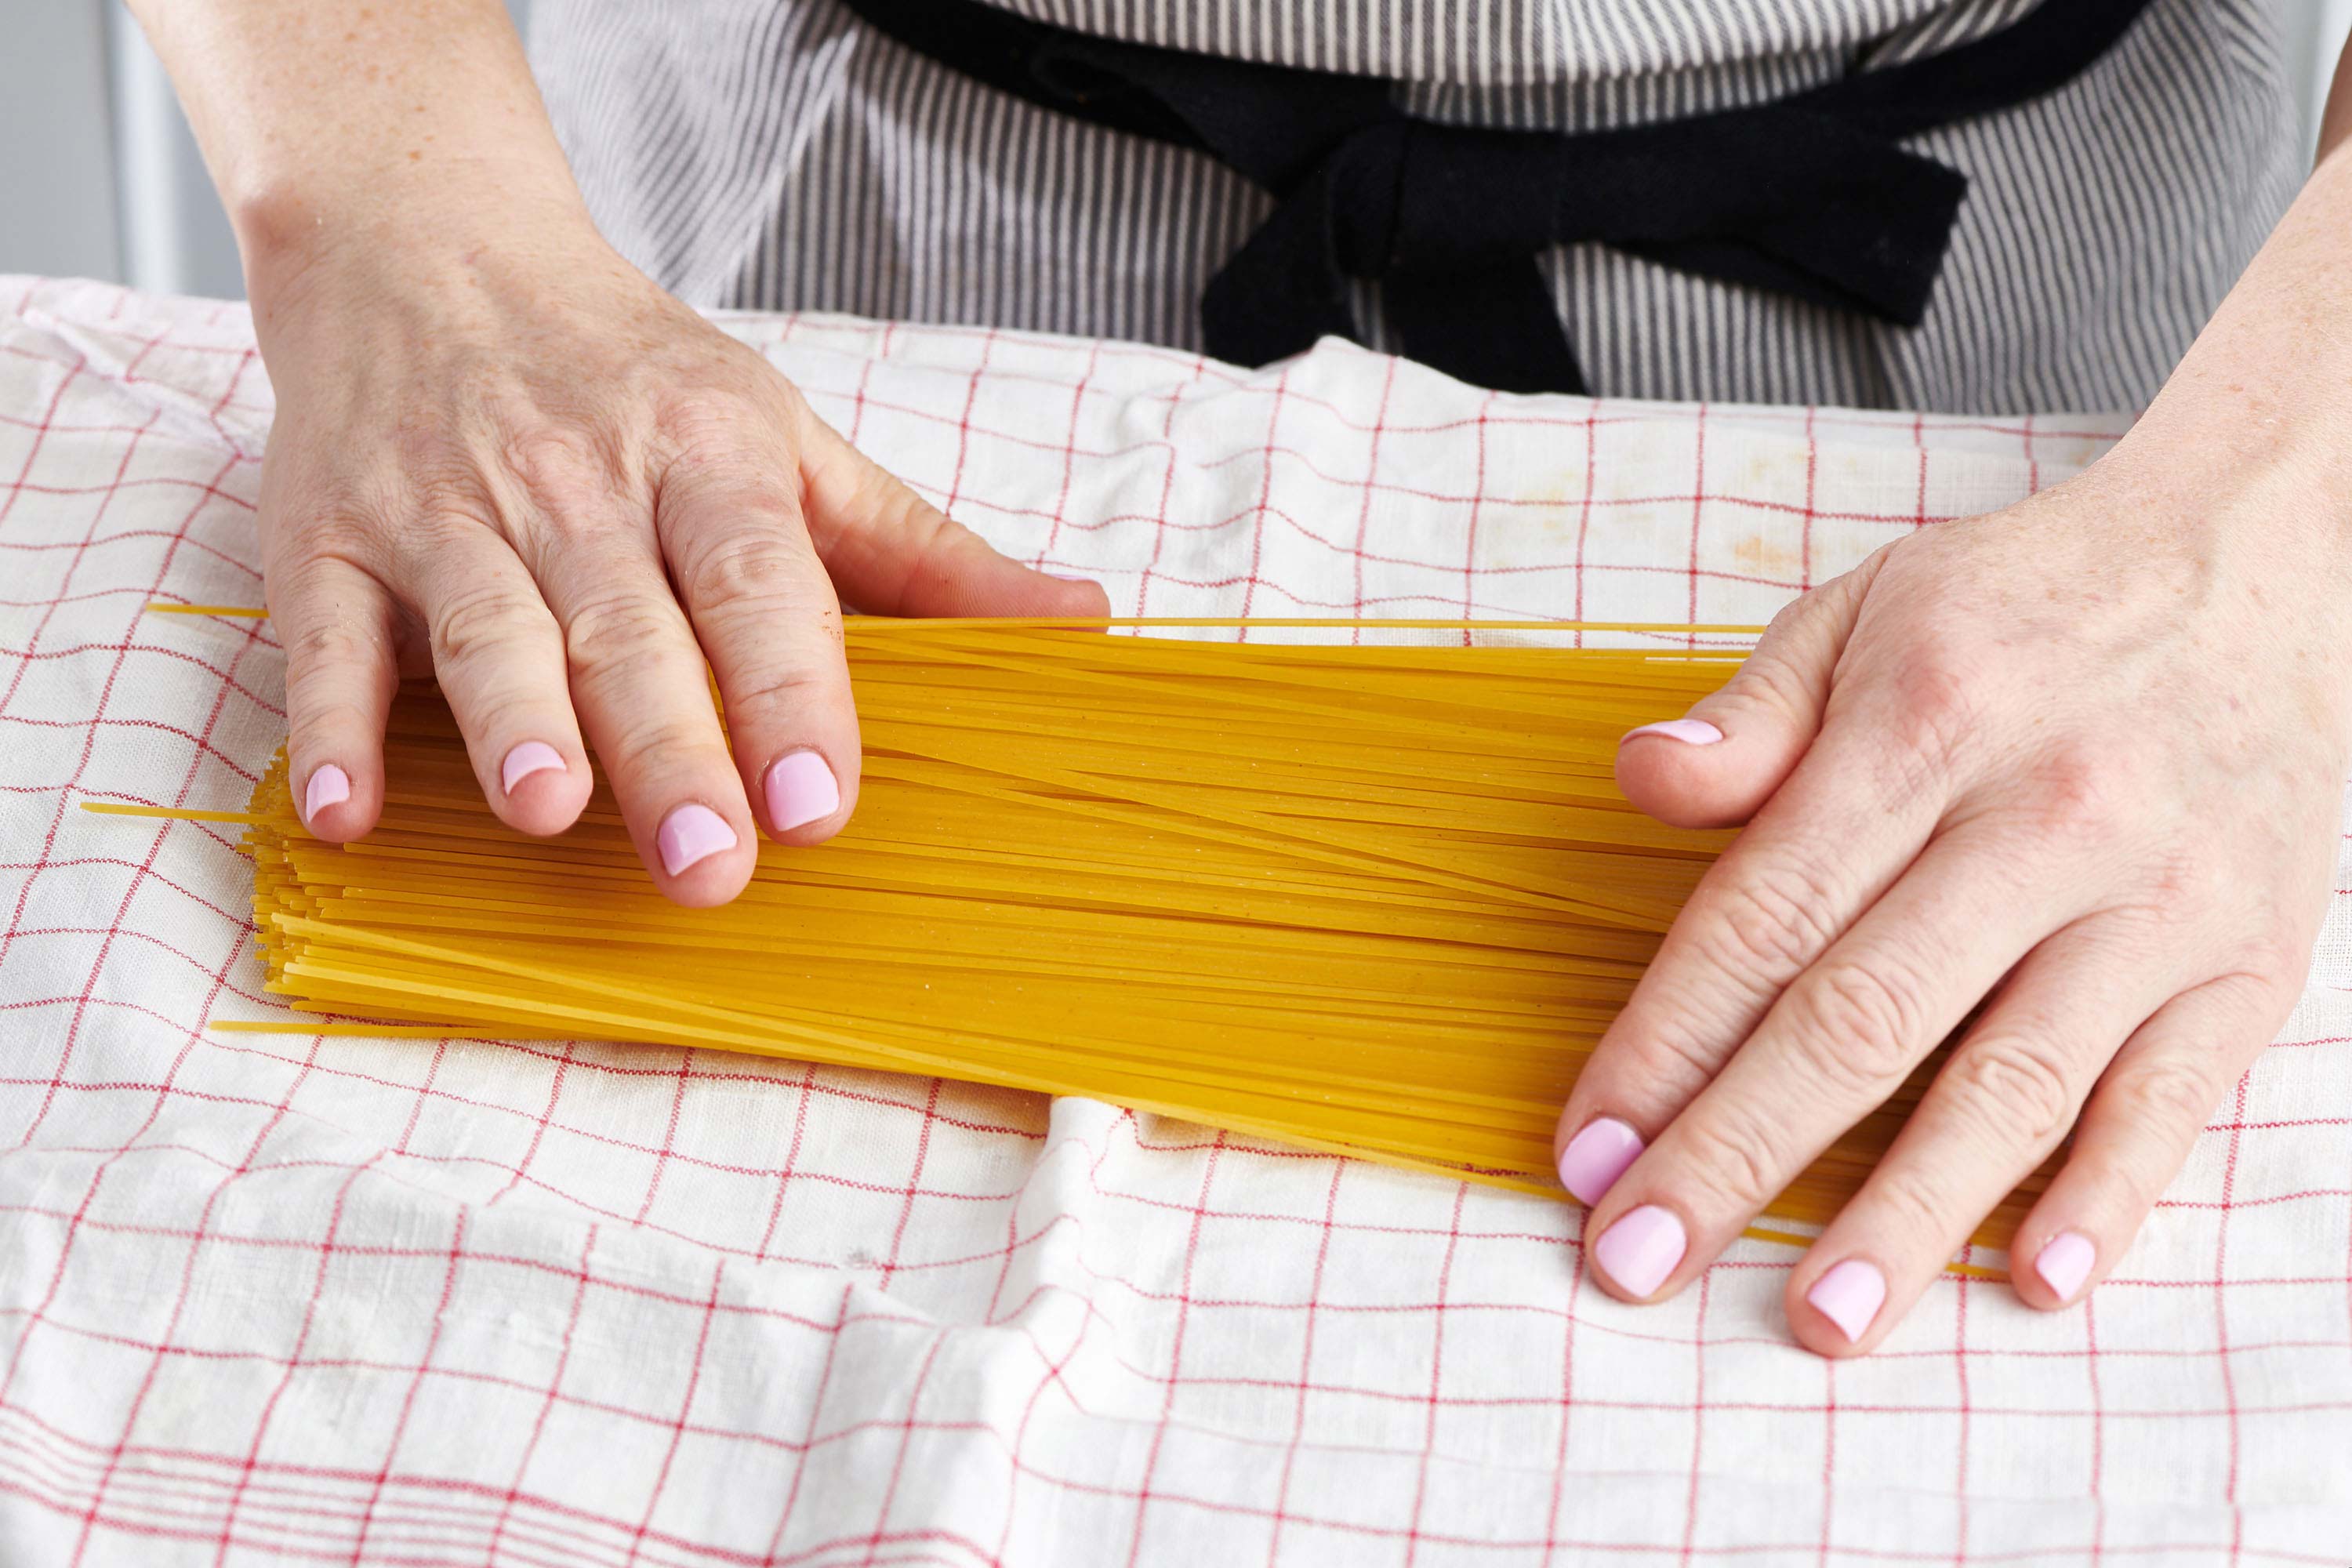 Woman placing uncooked spaghetti on a clean dishtowel.